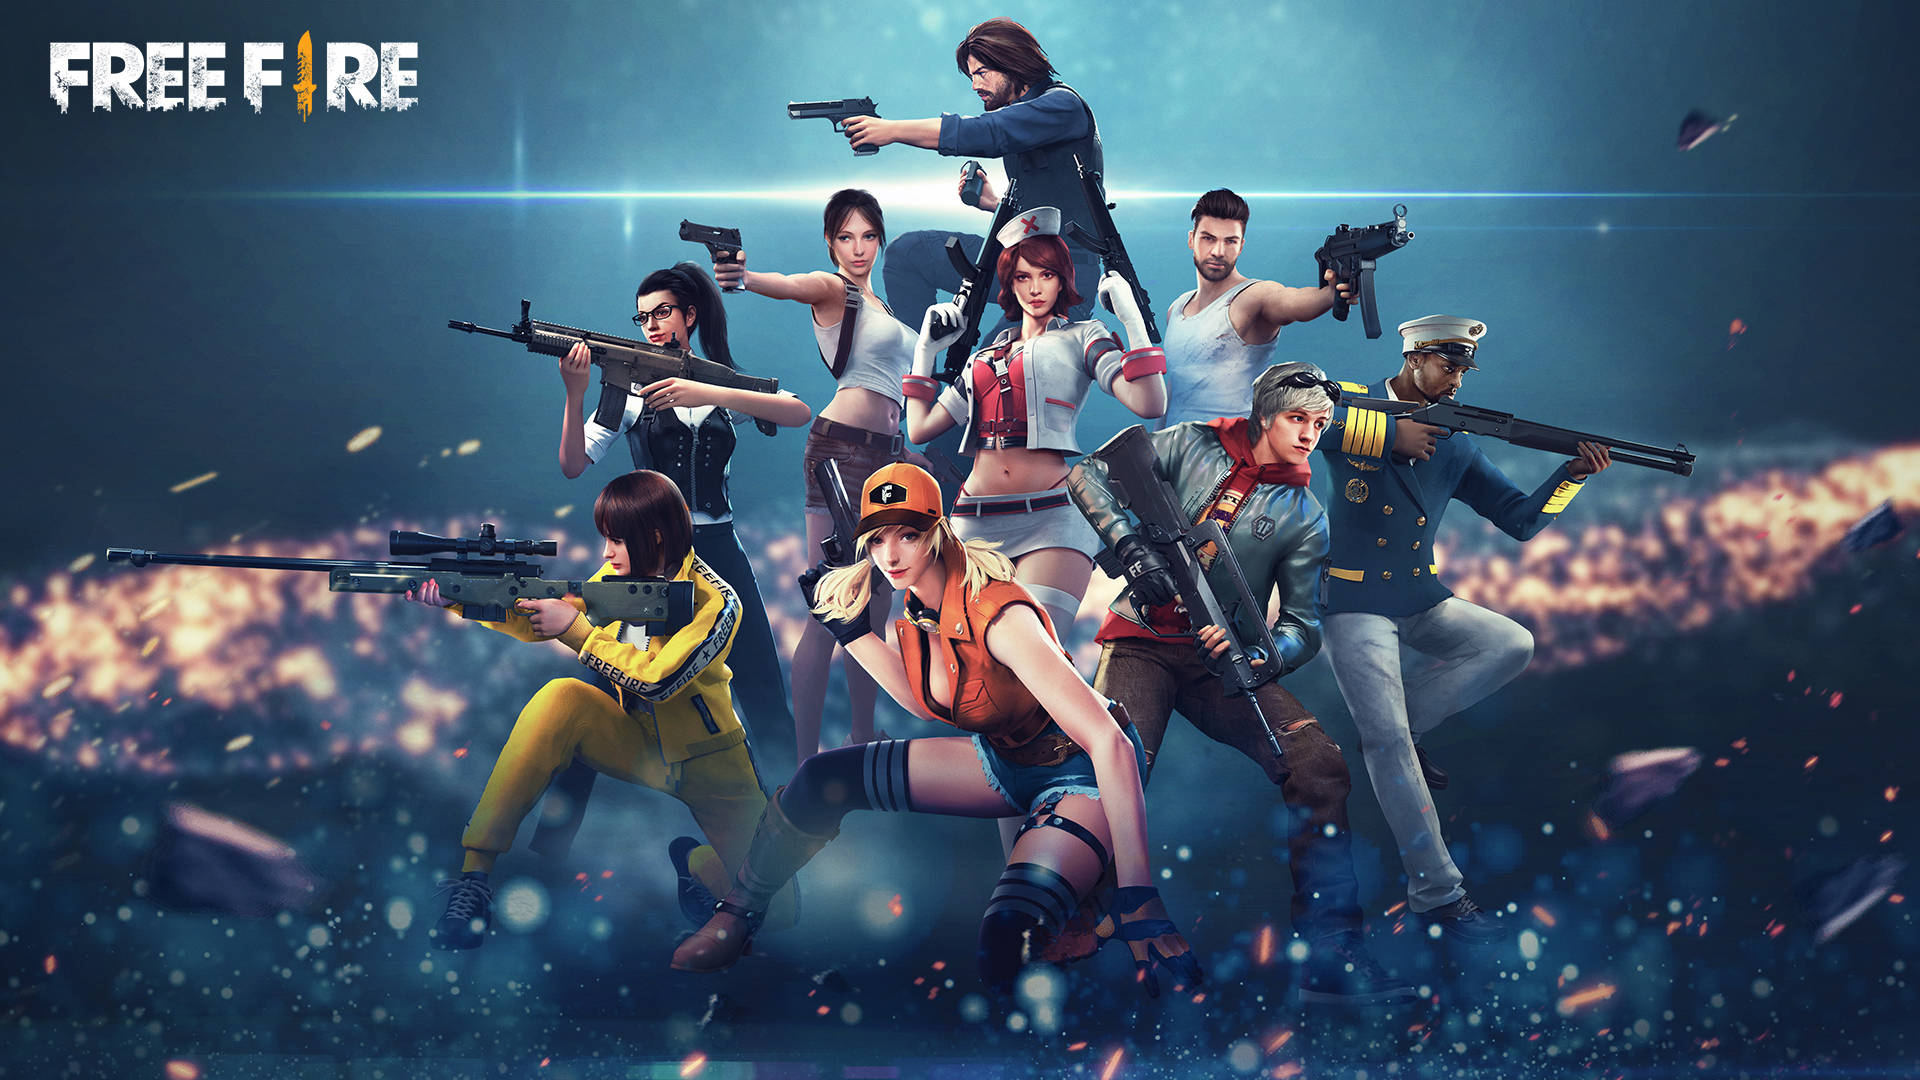 Garena Free Fire Wallpaper 4K, iOS Games, Android games